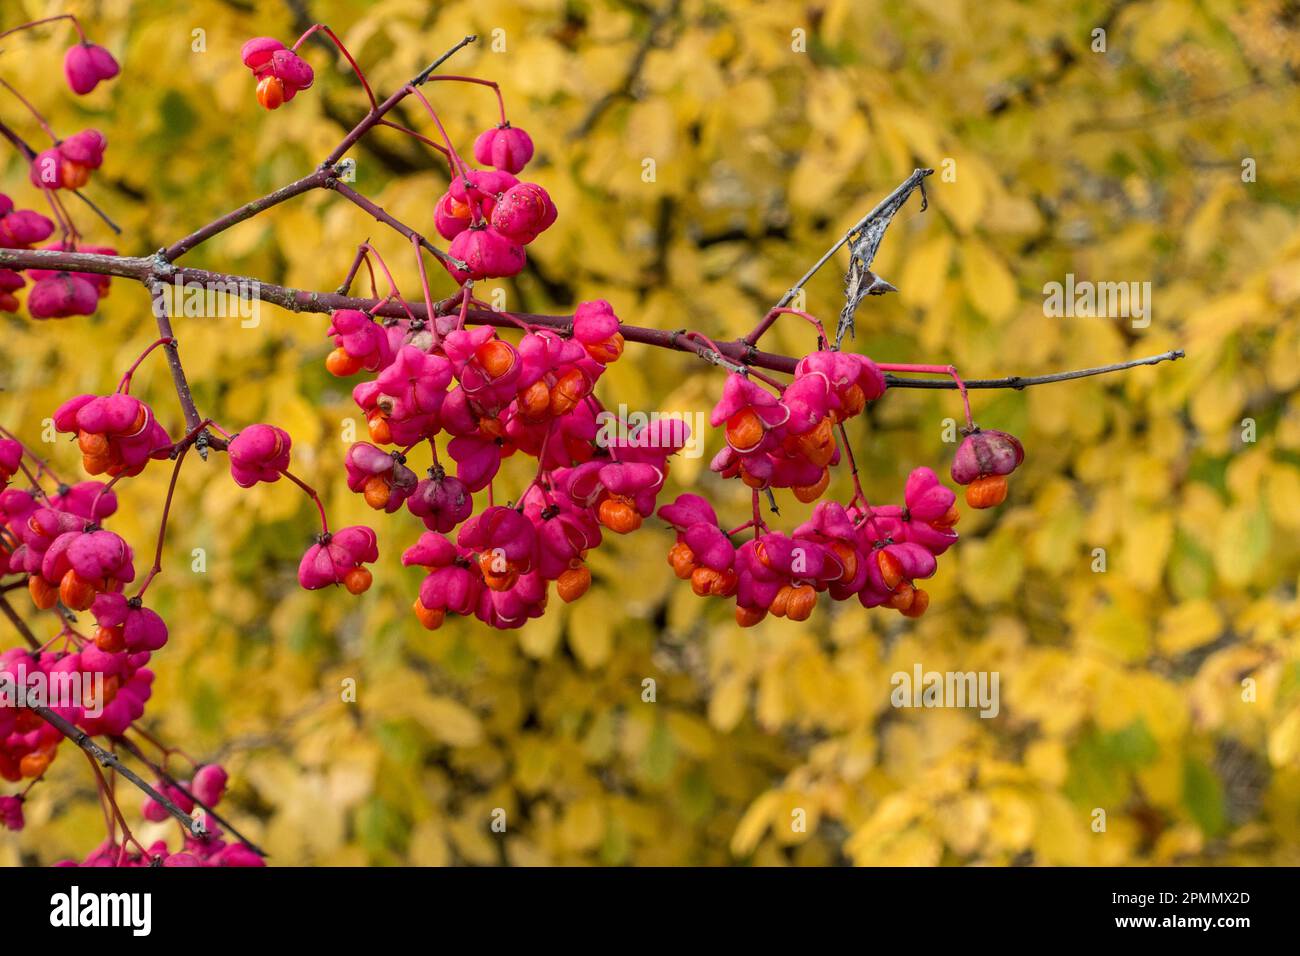 Red spindle (Euonymus europaeus) berries in Autumn Stock Photo